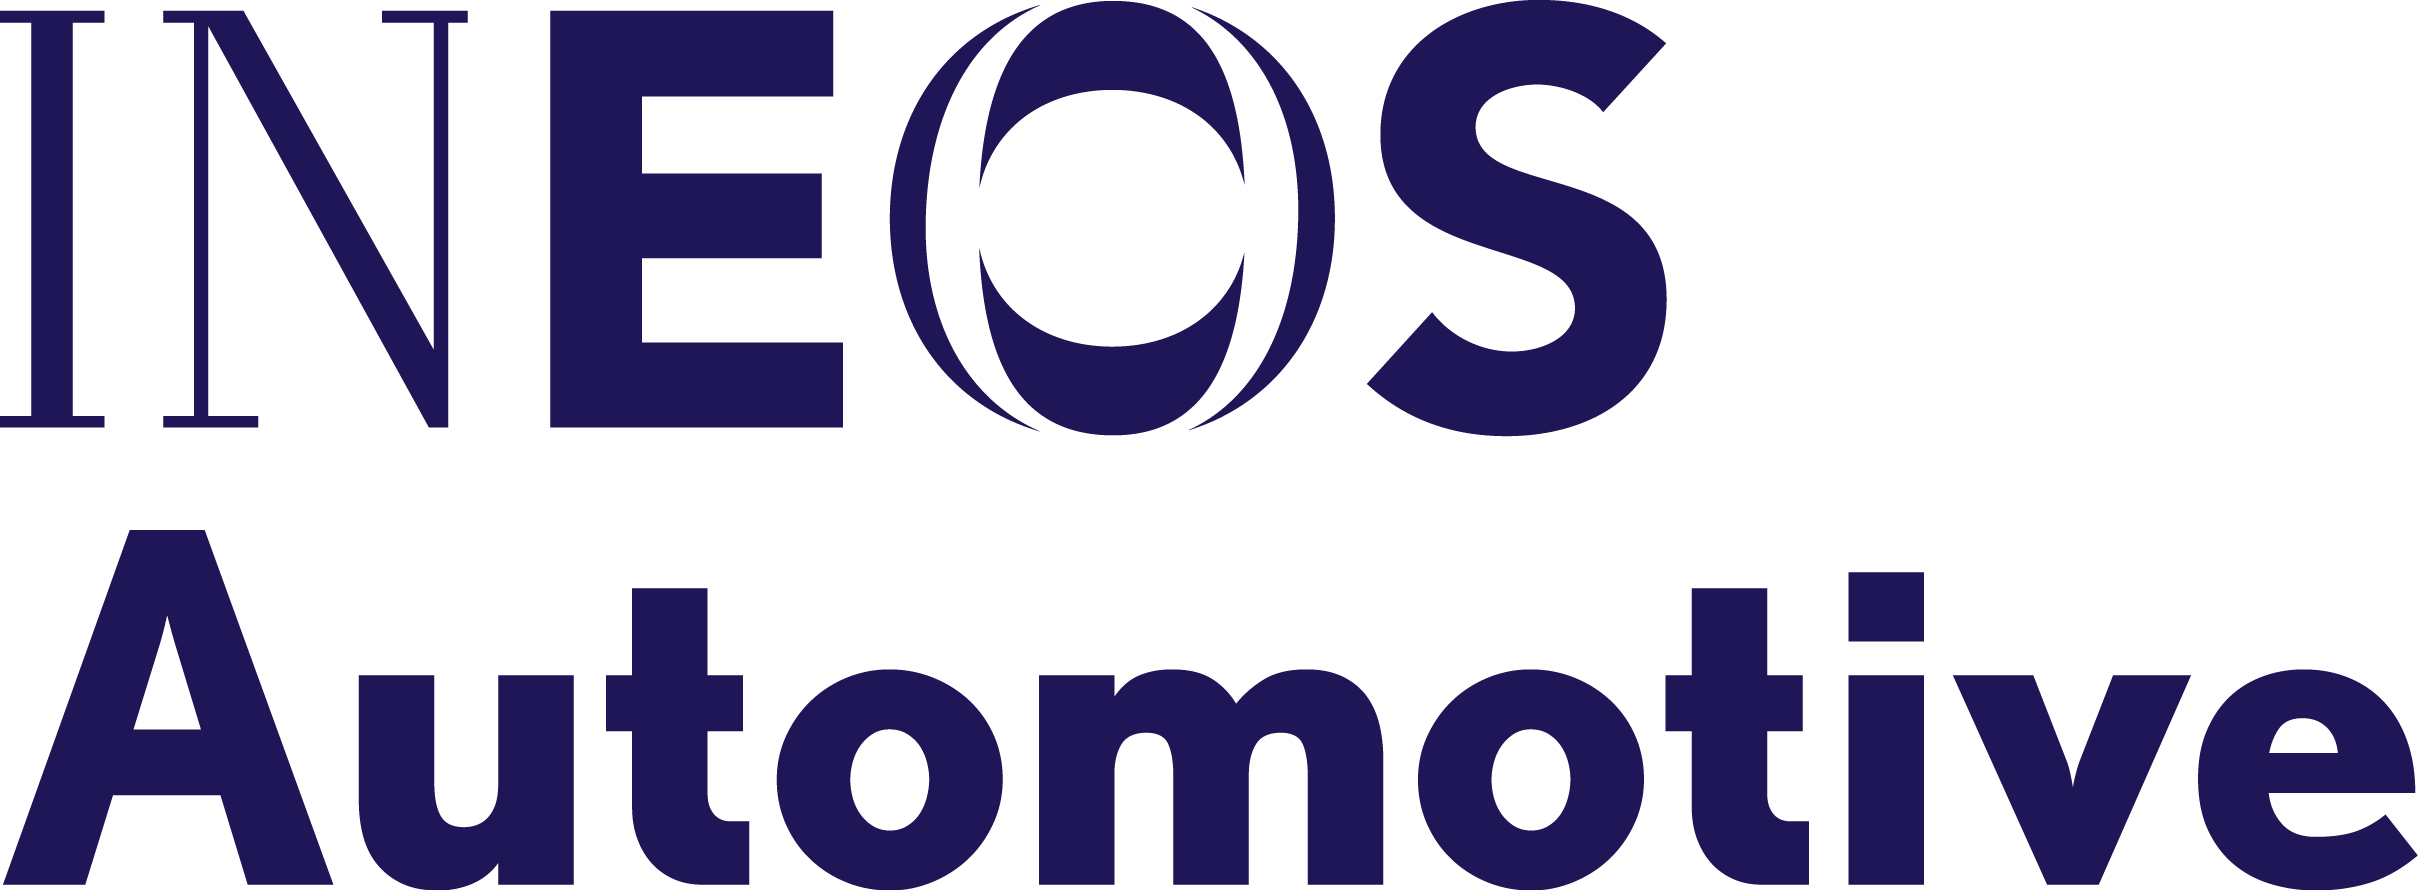 Ineos Logo - About